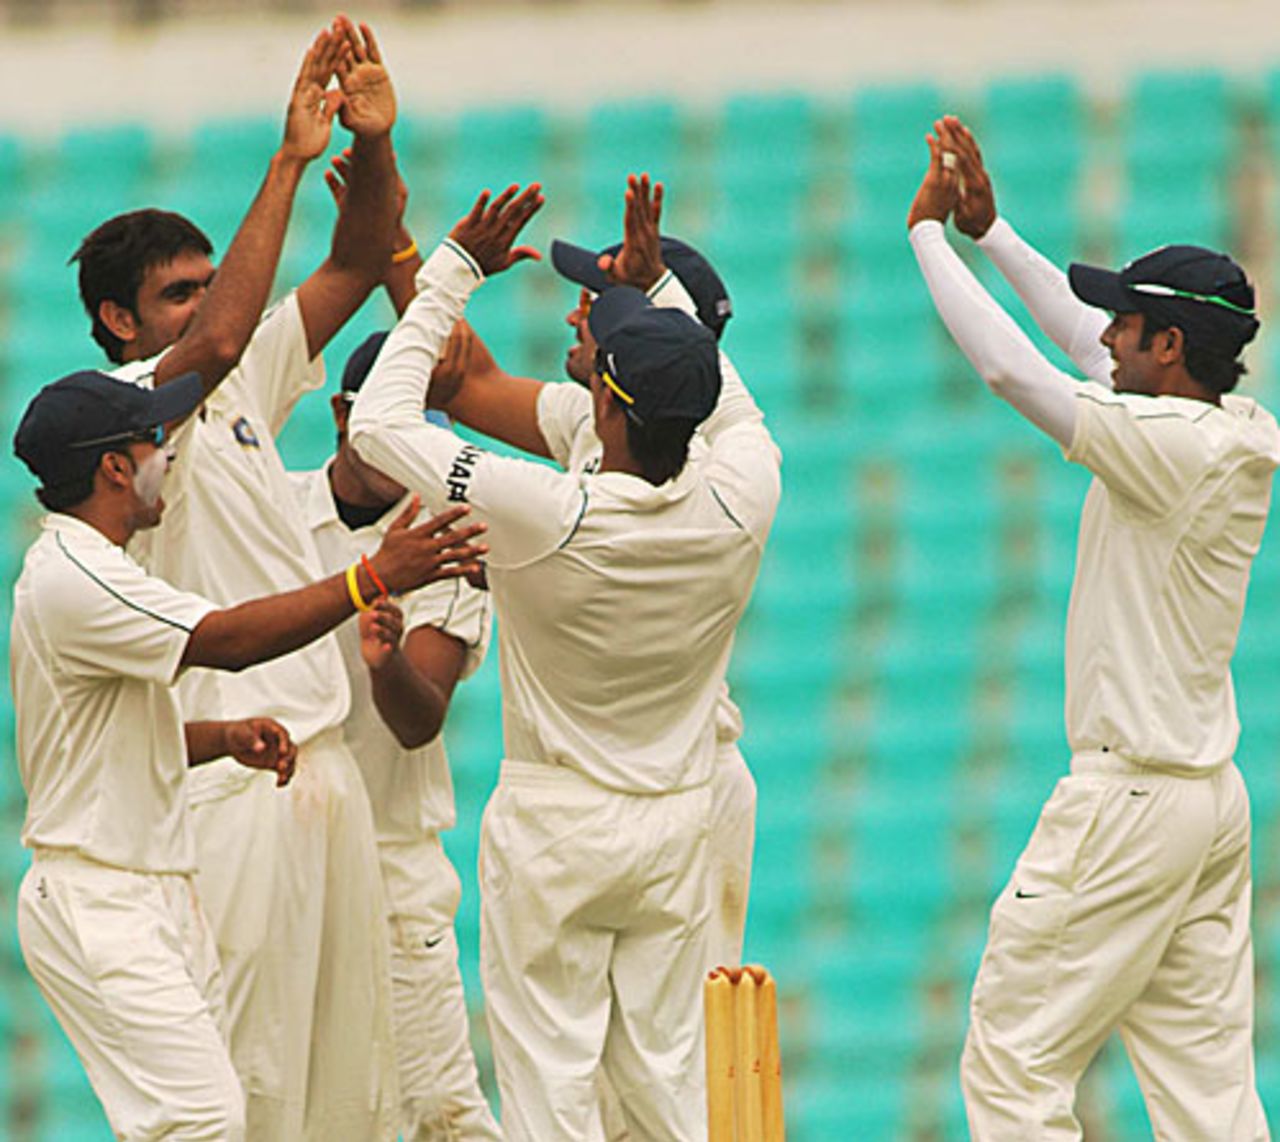 Munaf Patel and his team-mates celebrate a strike, Mumbai v Rest of India, Irani Cup, Nagpur, 2nd day, October 2, 2009